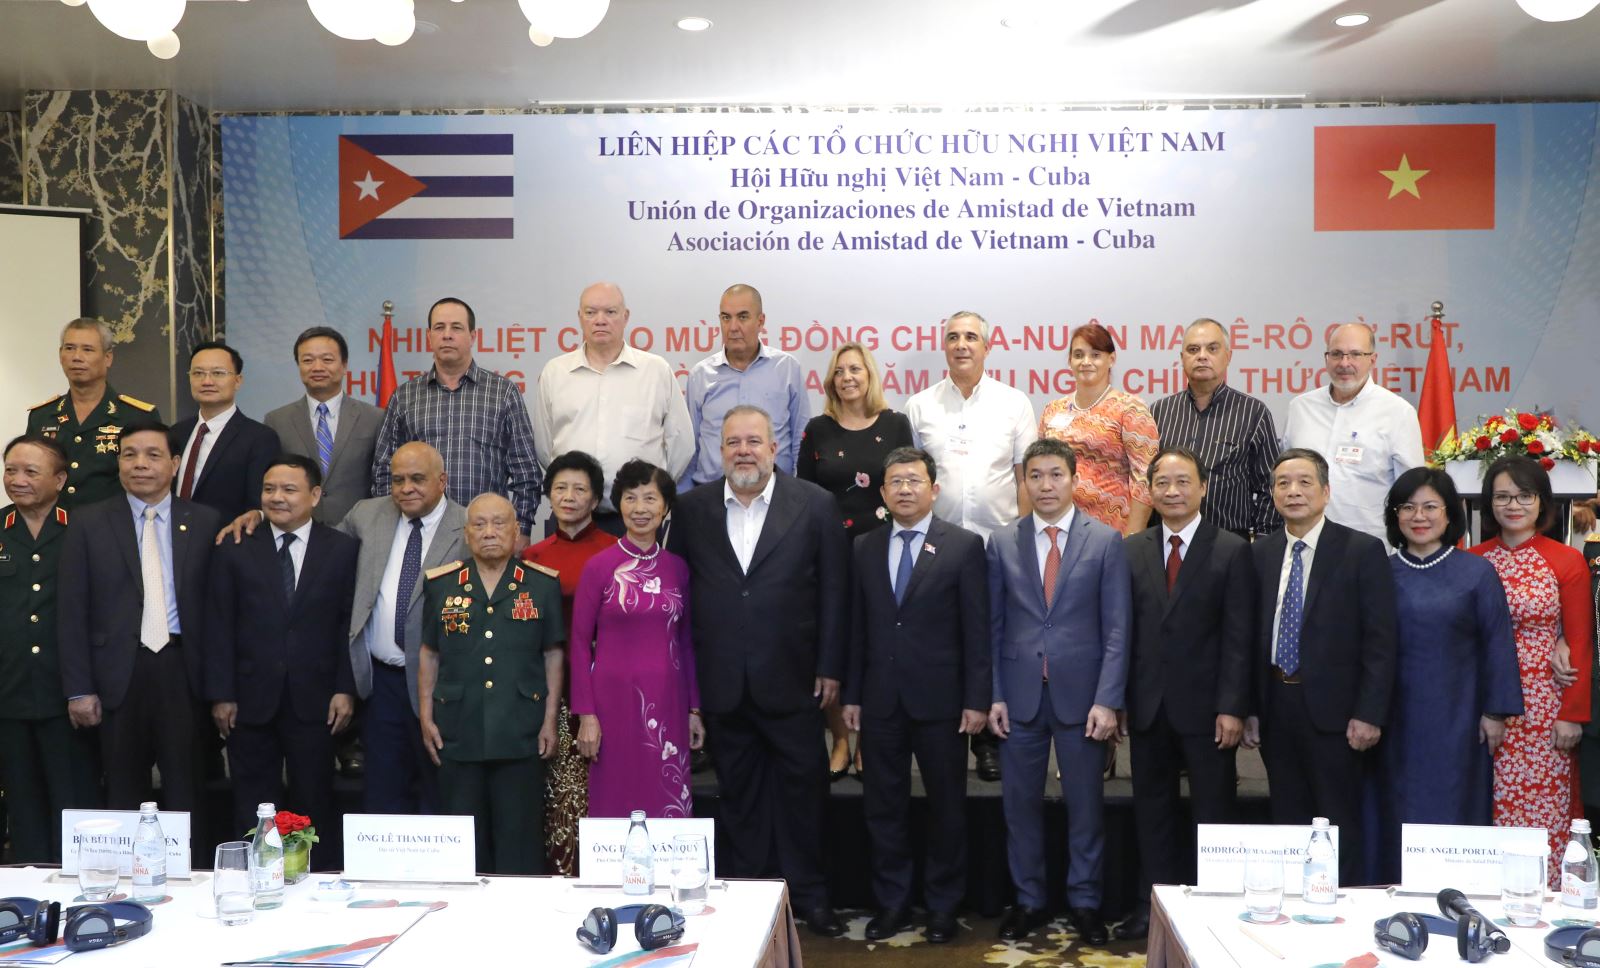 Cuban Prime Minister meets leader of the Vietnam Union of Friendship Organisations and leader of the Vietnam-Cuba Friendship Association